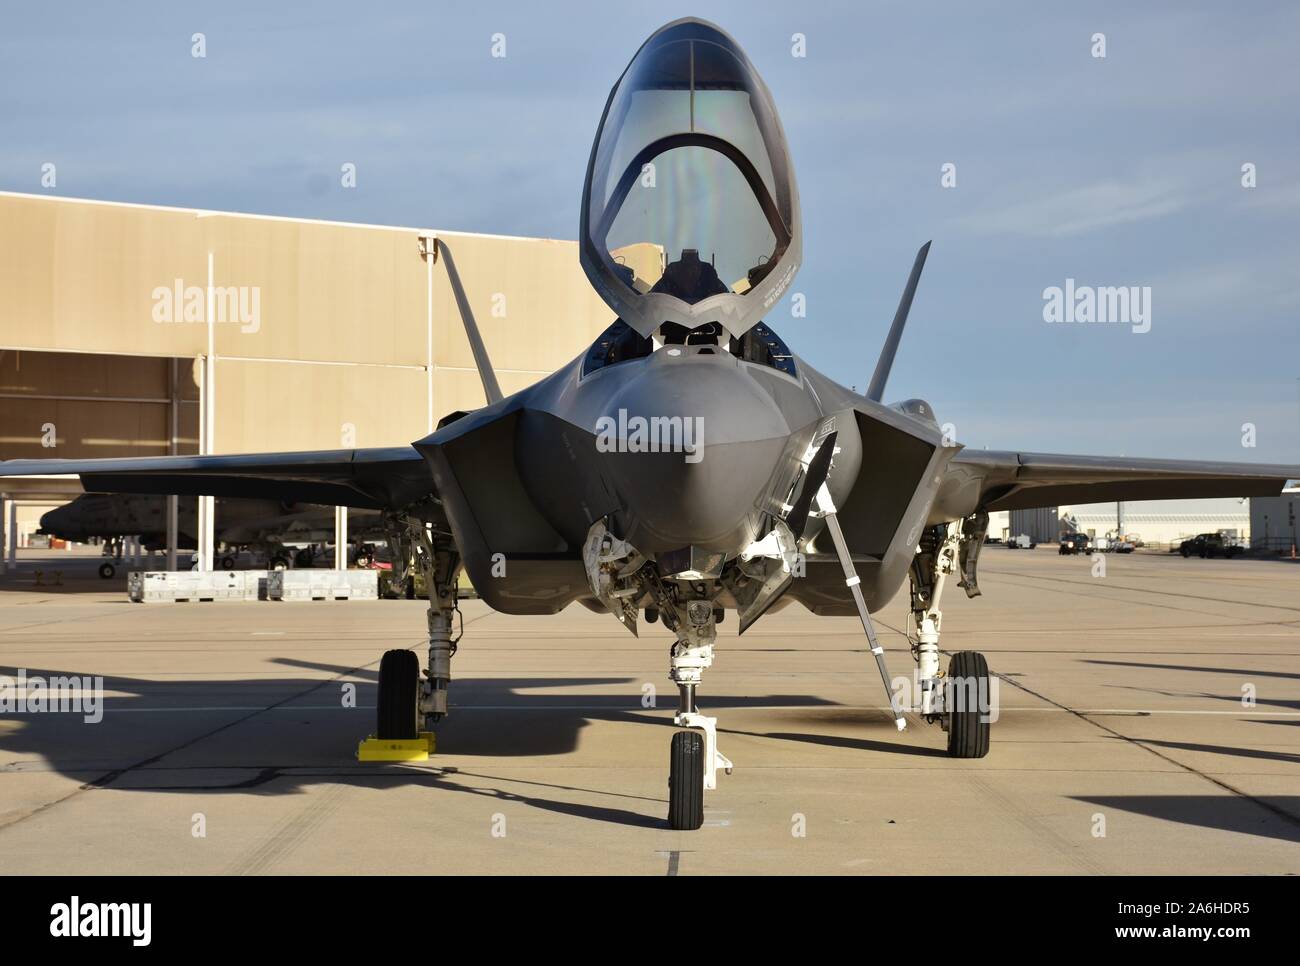 Tucson, USA - March 2, 2018: A U.S. Air Force F-35 Joint Strike Fighter (Lightning II) jet at Davis Monthan Air Force Base with the canopy up. Stock Photo